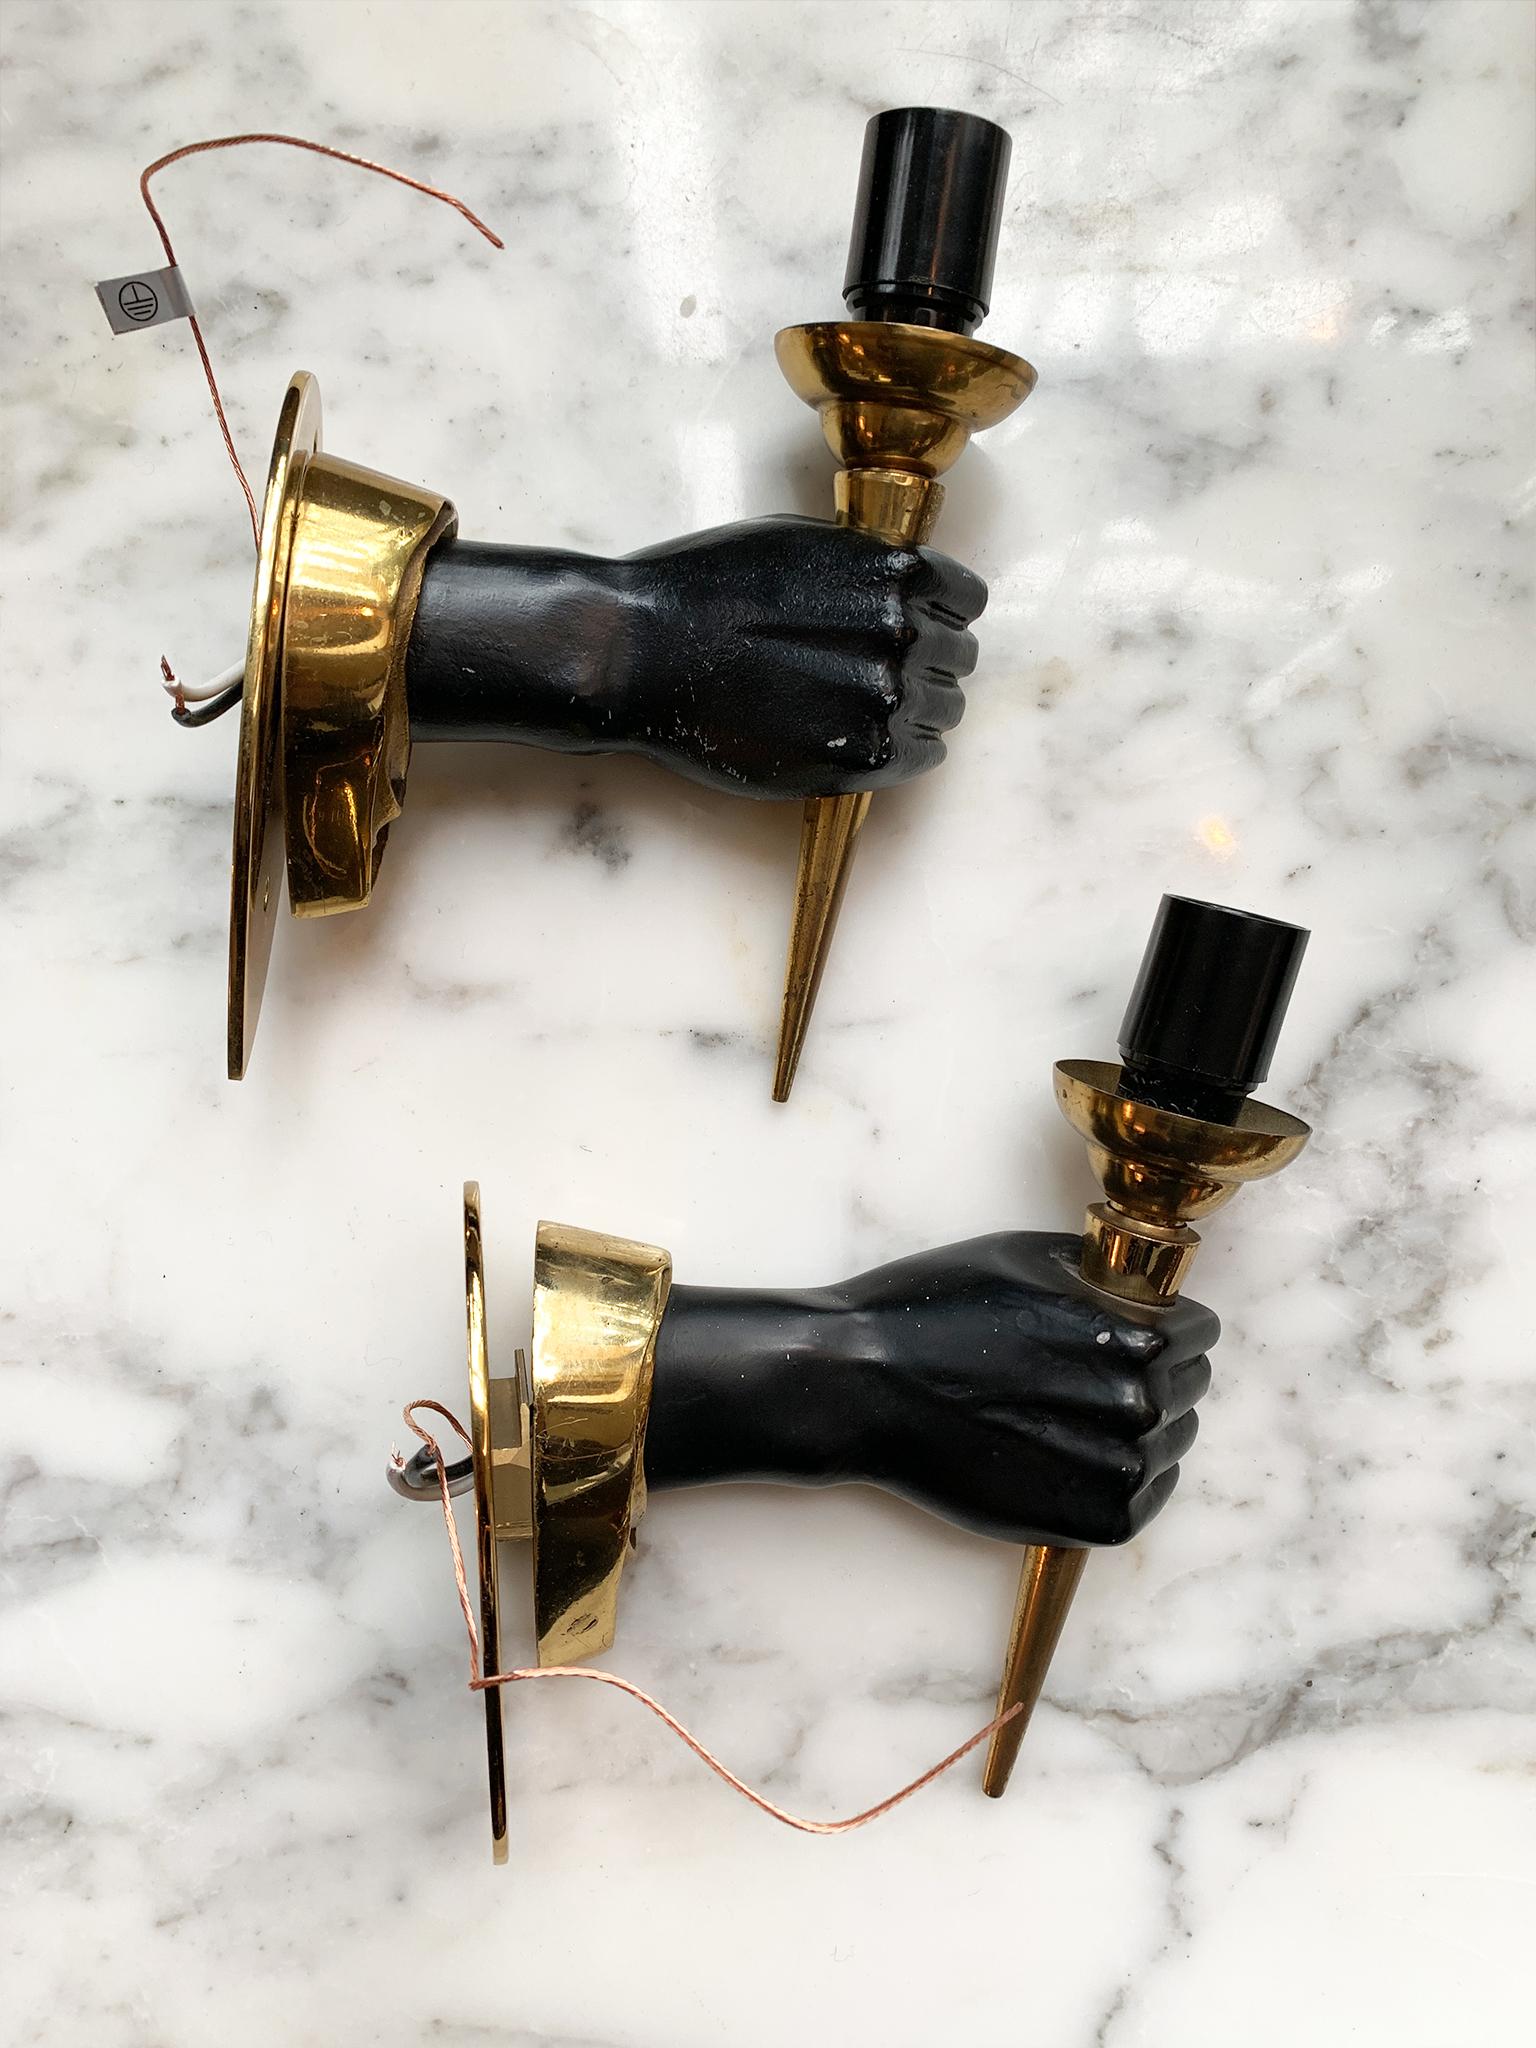 A pair of neoclassical handform sconces, mid-20th century. Designed in the style of André Arbus. They are comprised of brass backplates, brass candleholders, and black-painted metal hands. Each sconce is newly rewired.

Dimensions:
3 1/16 in.